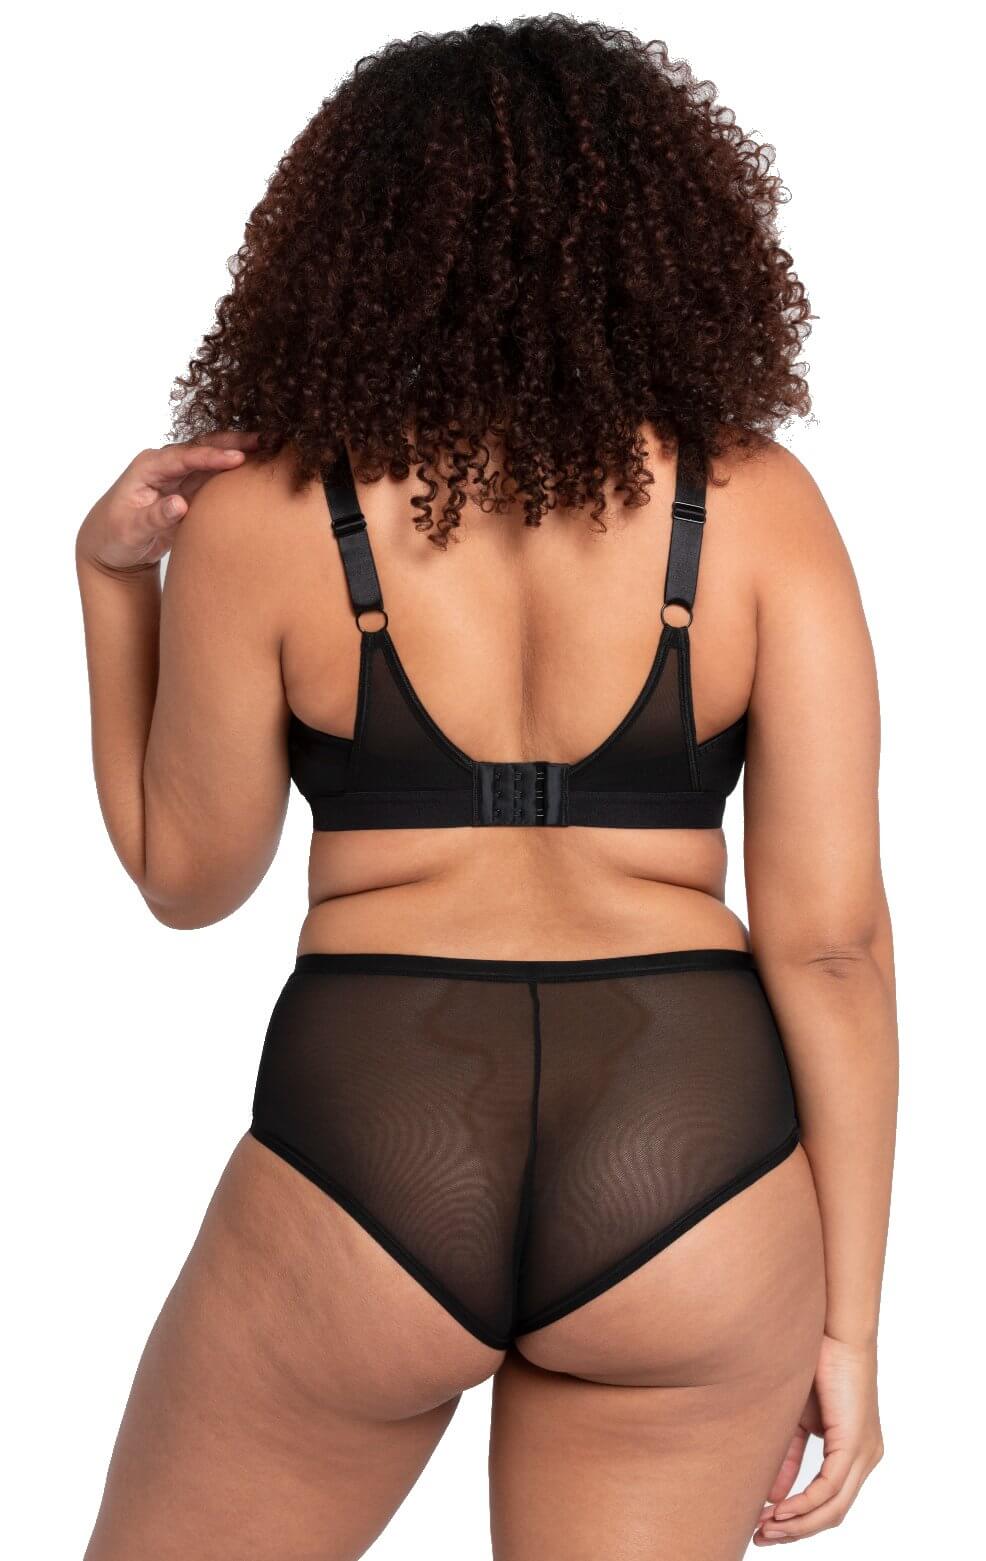 Curvy Kate Get Up and Chill Bralette - Black Bras 